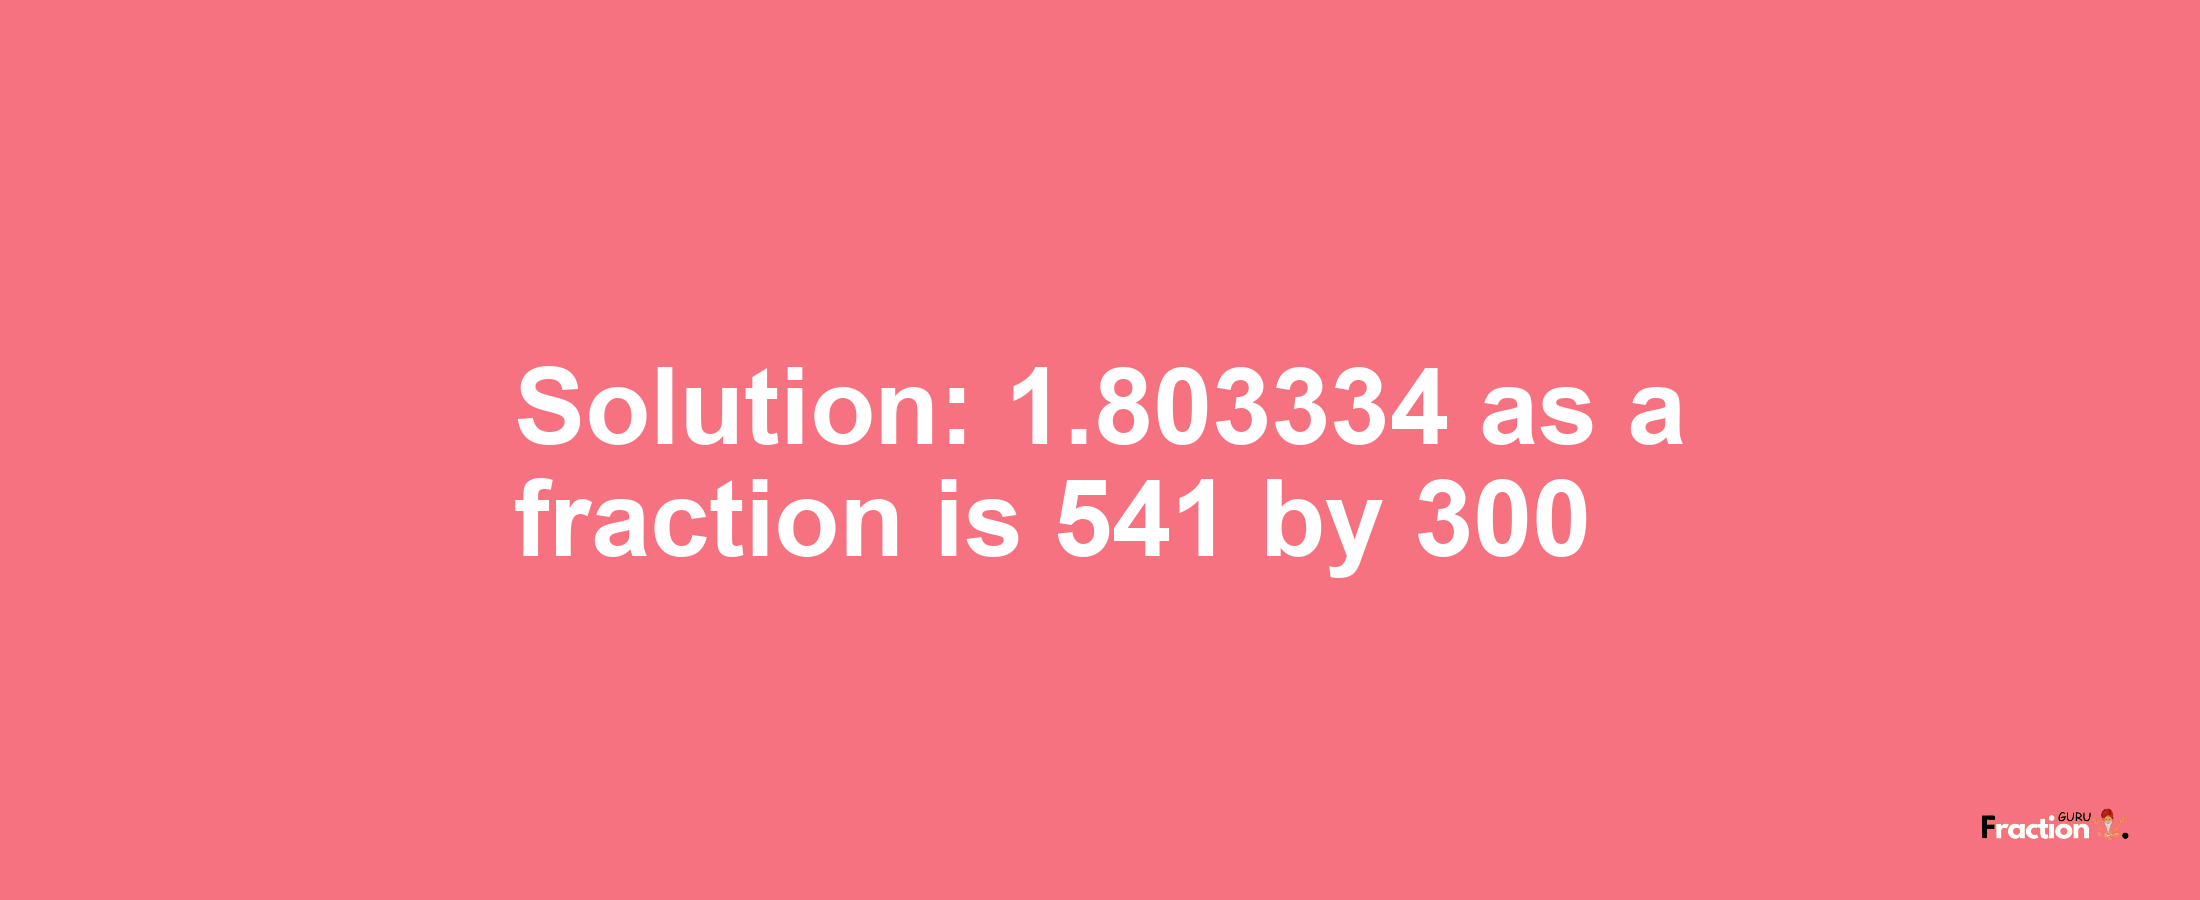 Solution:1.803334 as a fraction is 541/300